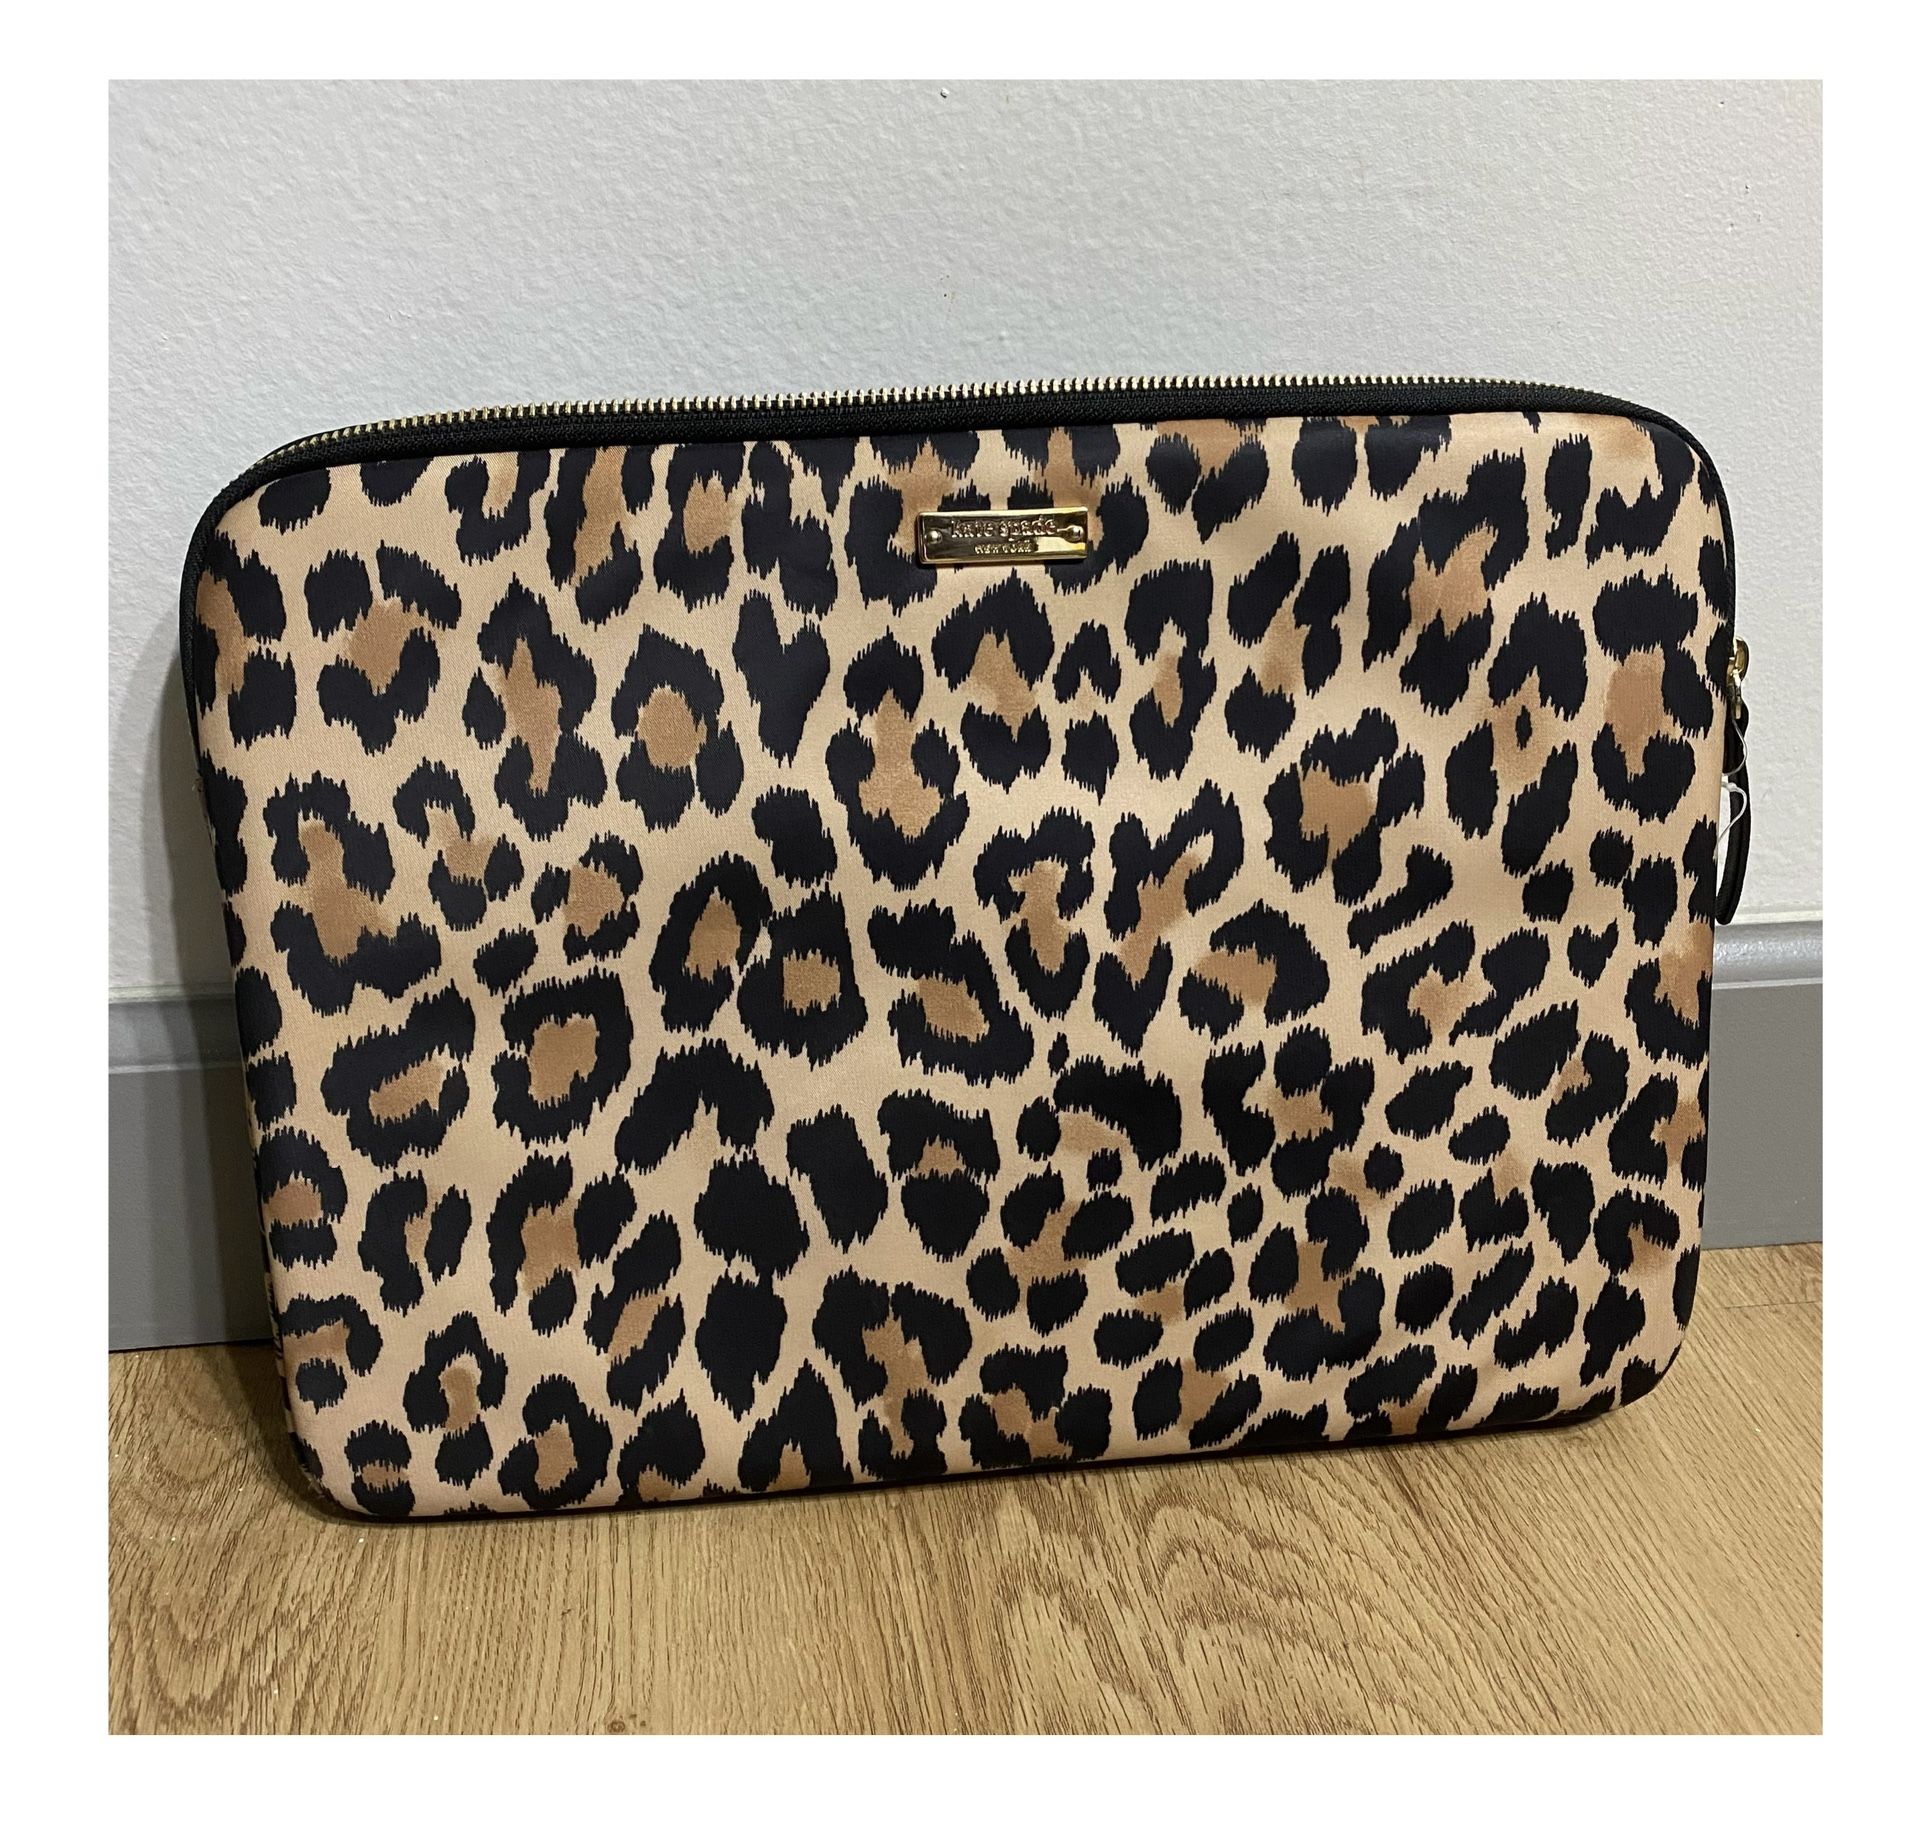 Kate Spade Laptop Sleeve. Leopard print with gold hardware. Fits13” in very good condition